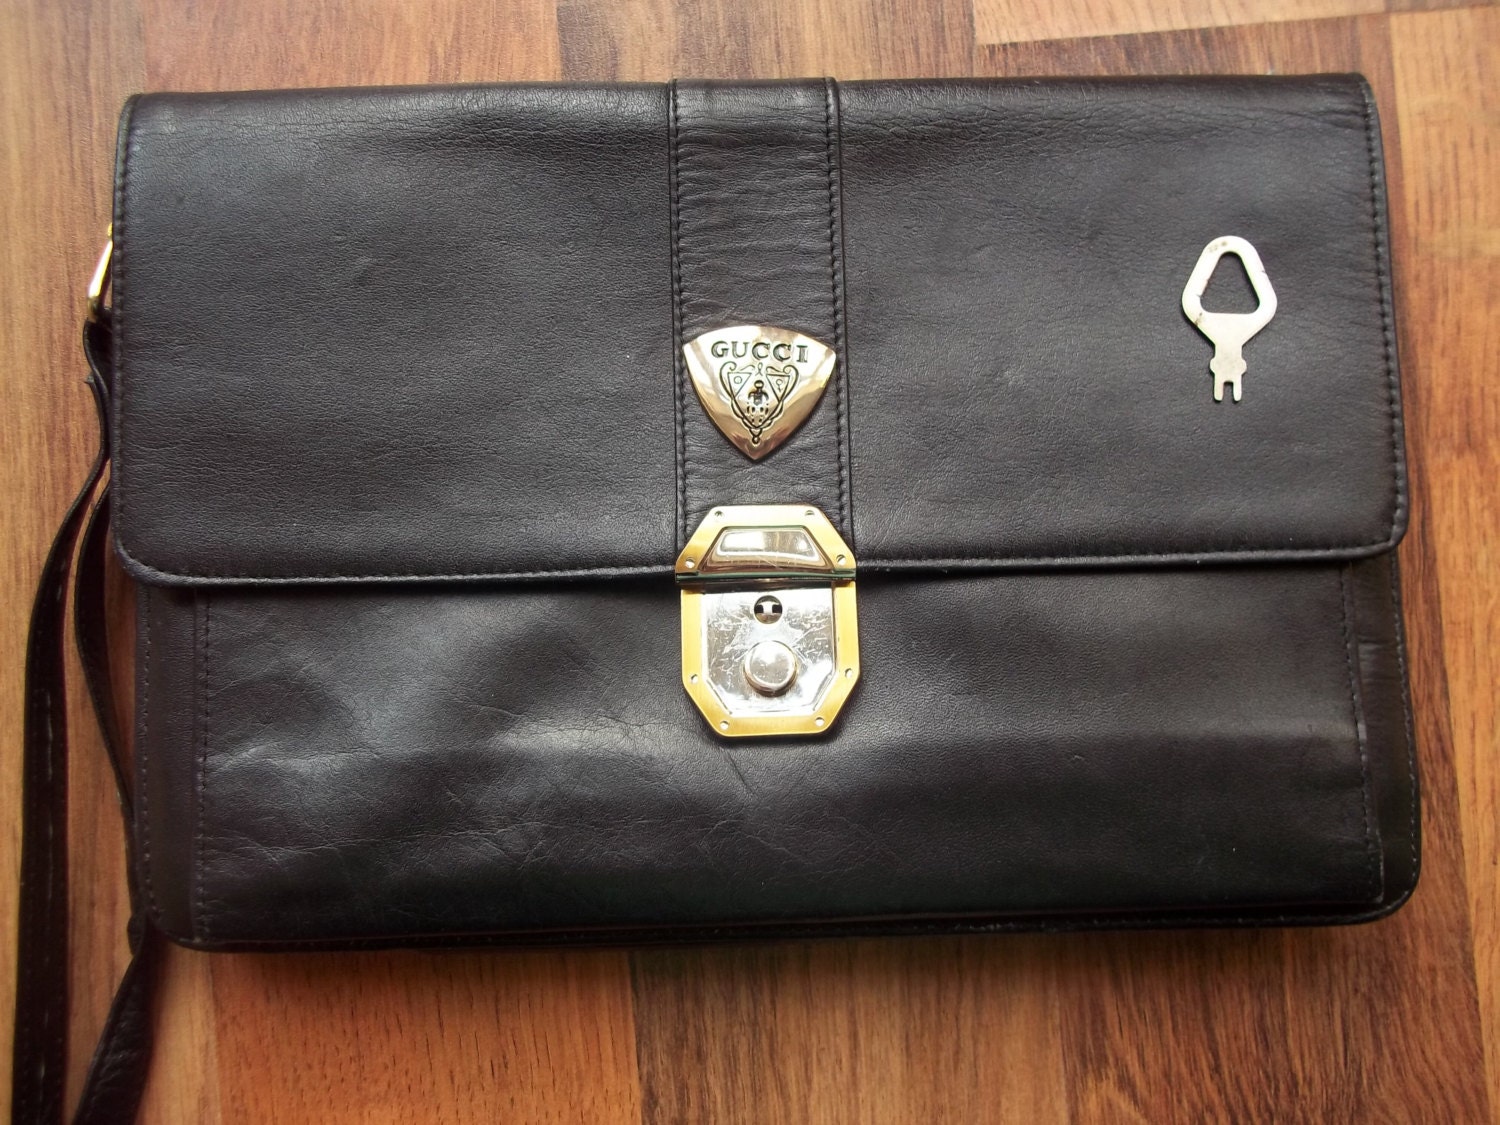 Items similar to Vintage 1970s Gucci Itallian Butter Leather Large Clutch Handbag WITH KEY on Etsy